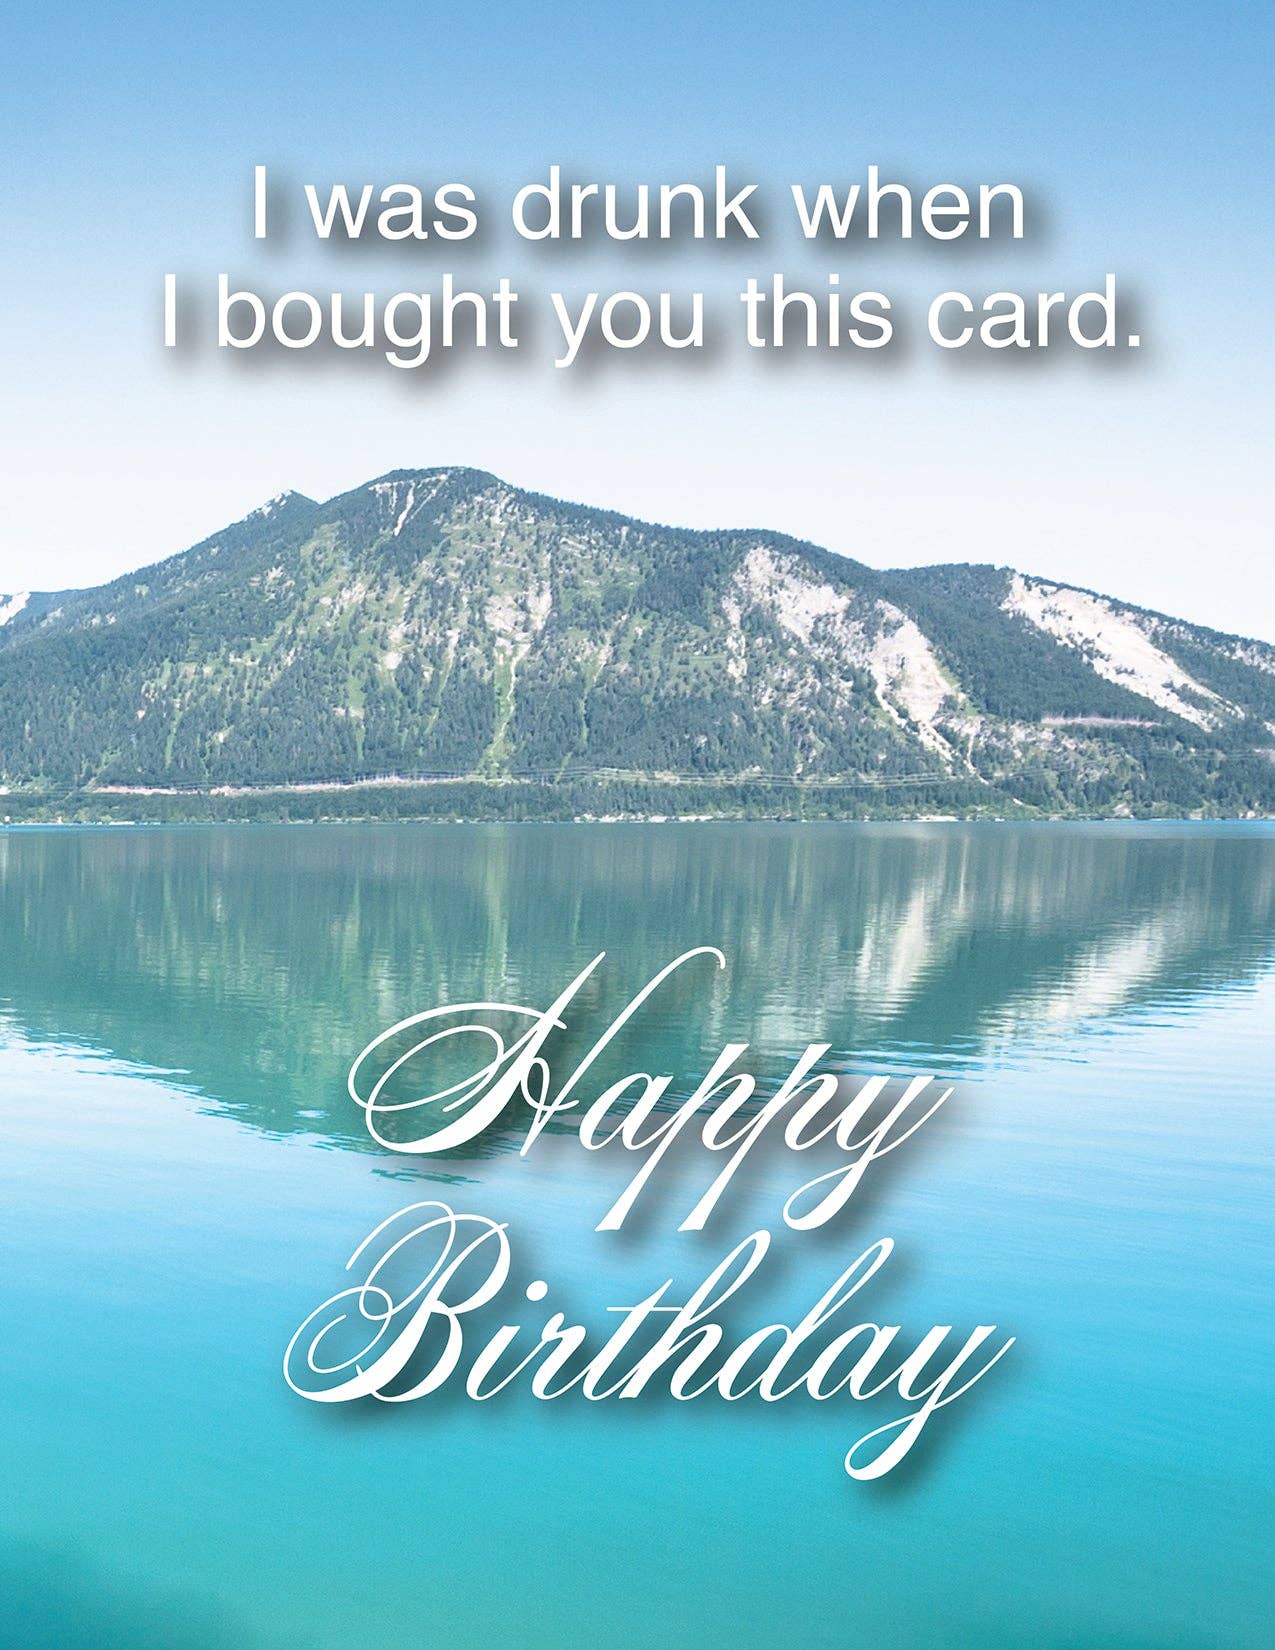 Drunk Greeting Card | Funny Cards